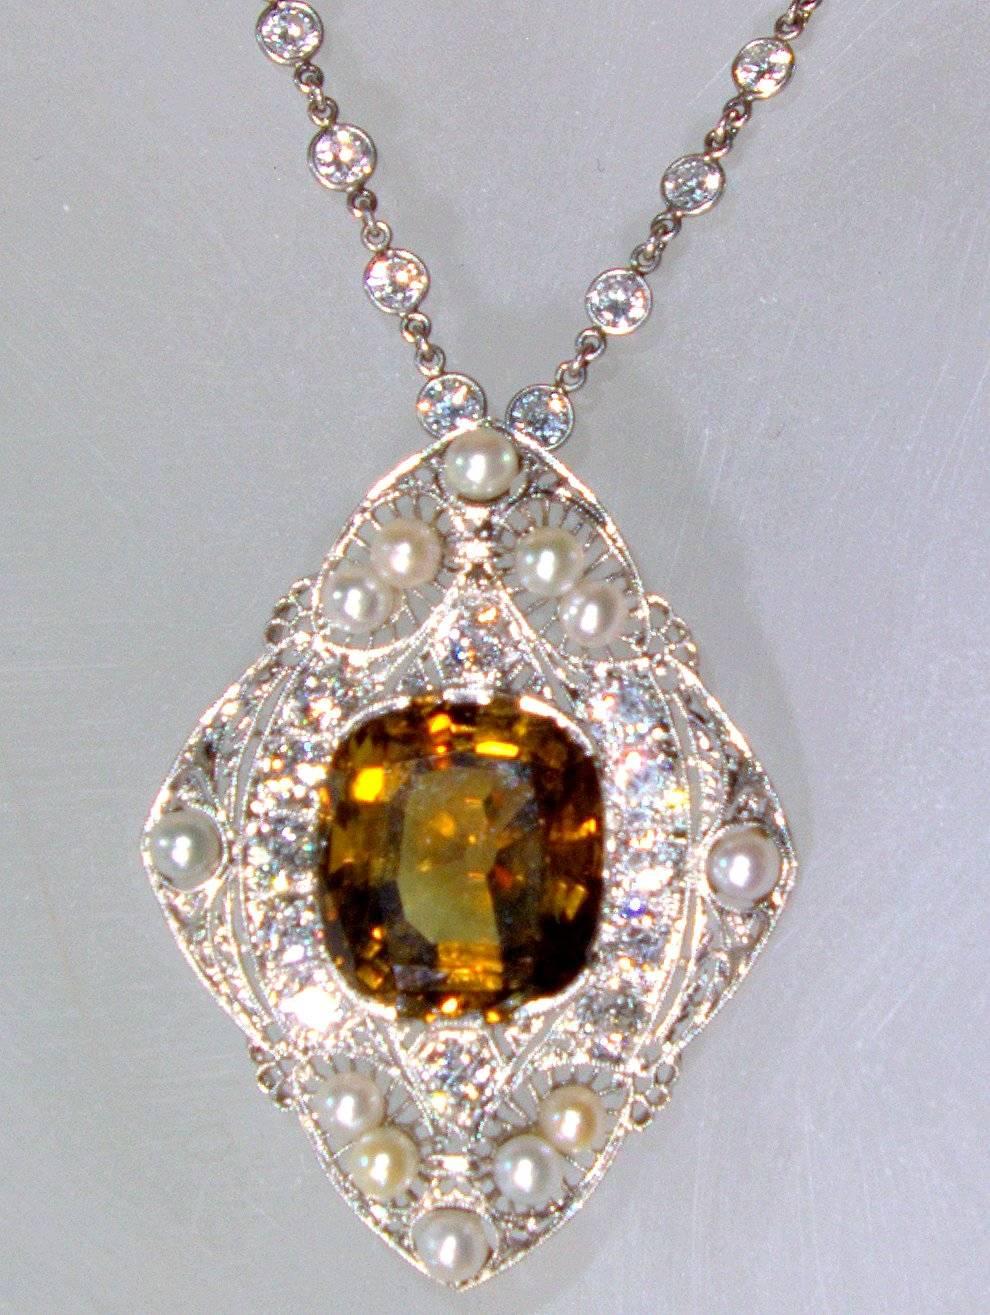 Circa 1915 and probably American this pendant suspends from a modern diamond chain that possesses 5 cts.  The unusual center stone is a mine cut chrysoberyl weighing approximately 14 cts.  It is a bright golden root-beer color.  There are 12 round